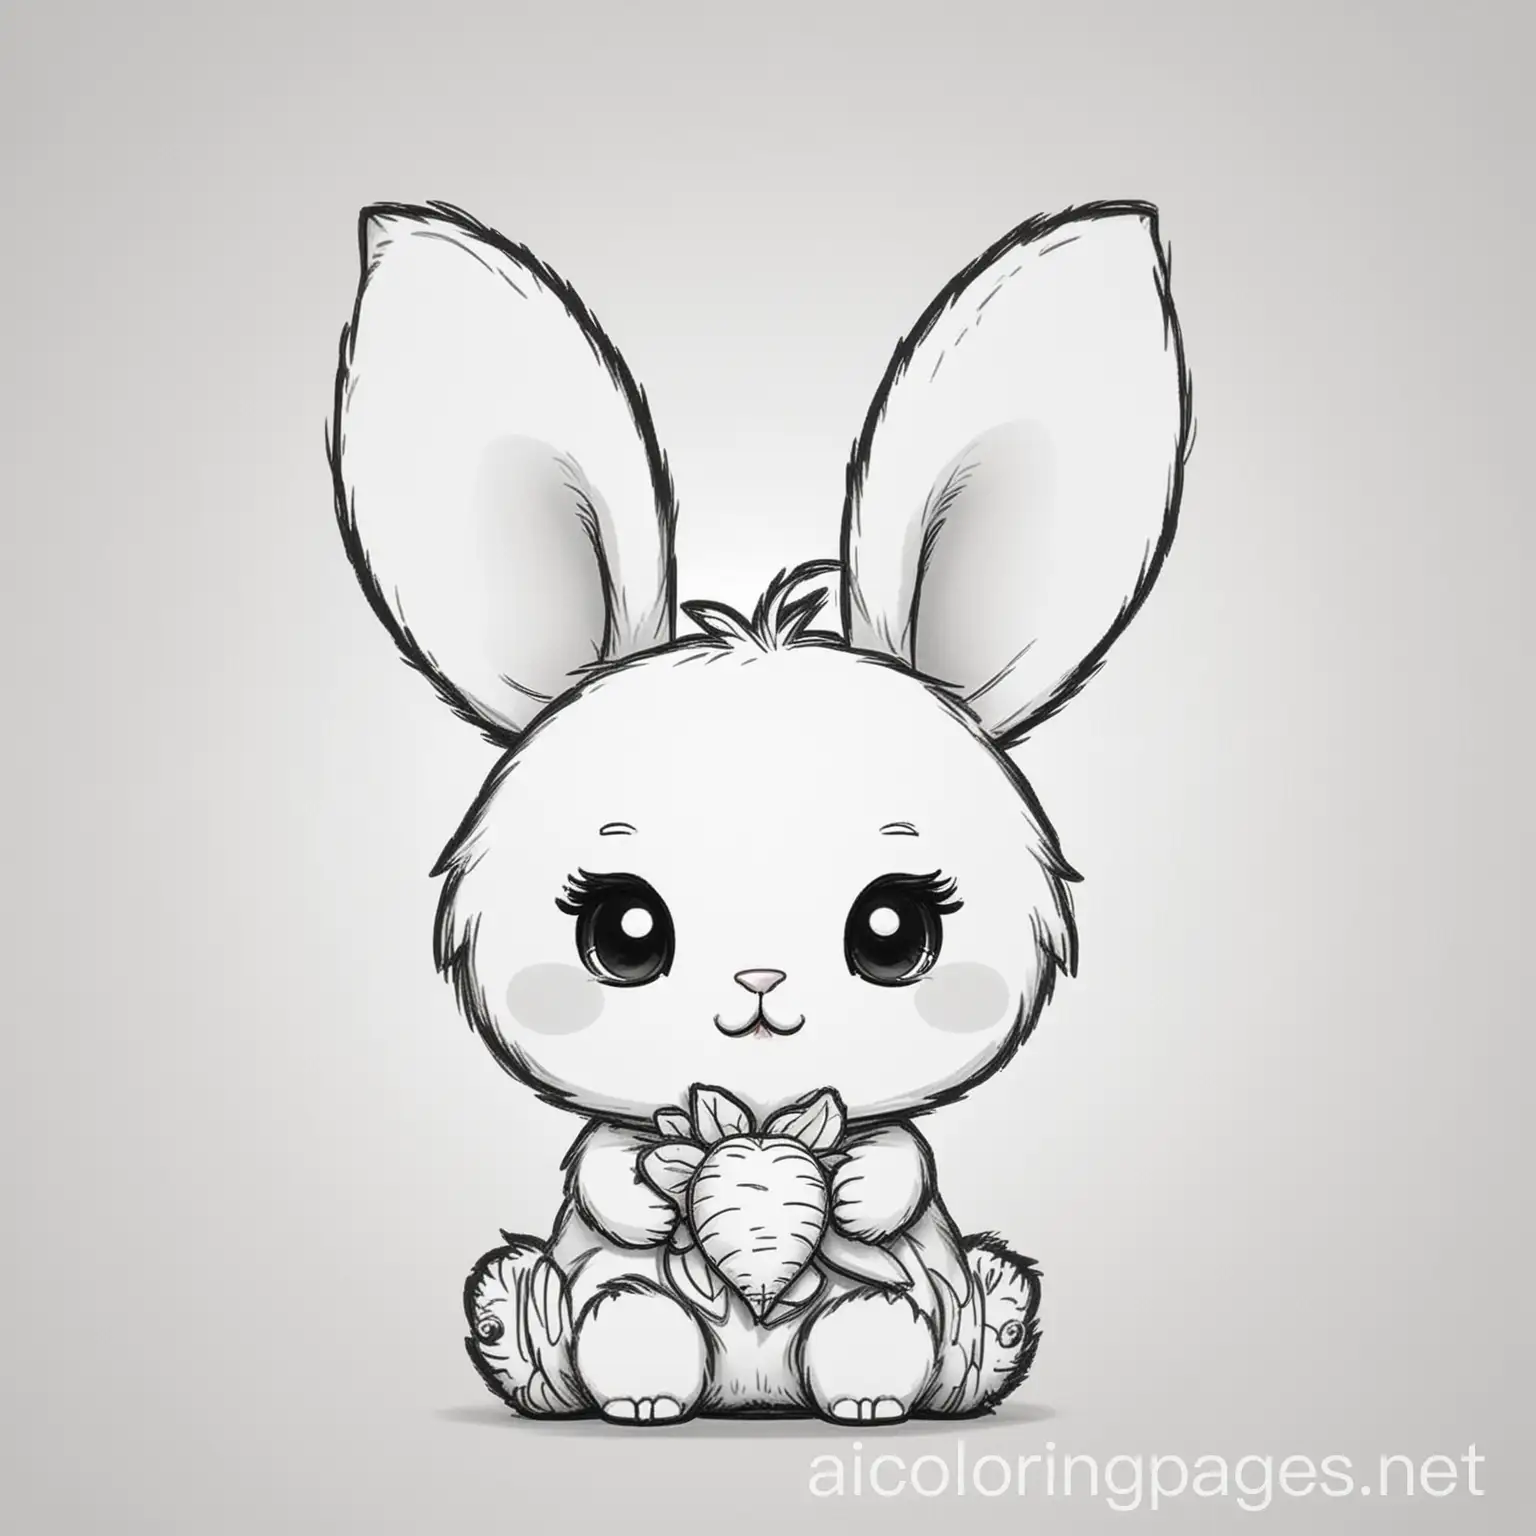 Kawaii Bunny - Fluffy with long ears, a tiny nose, and holding a small carrot, Coloring Page, black and white, line art, white background, Simplicity, Ample White Space. The background of the coloring page is plain white to make it easy for young children to color within the lines. The outlines of all the subjects are easy to distinguish, making it simple for kids to color without too much difficulty